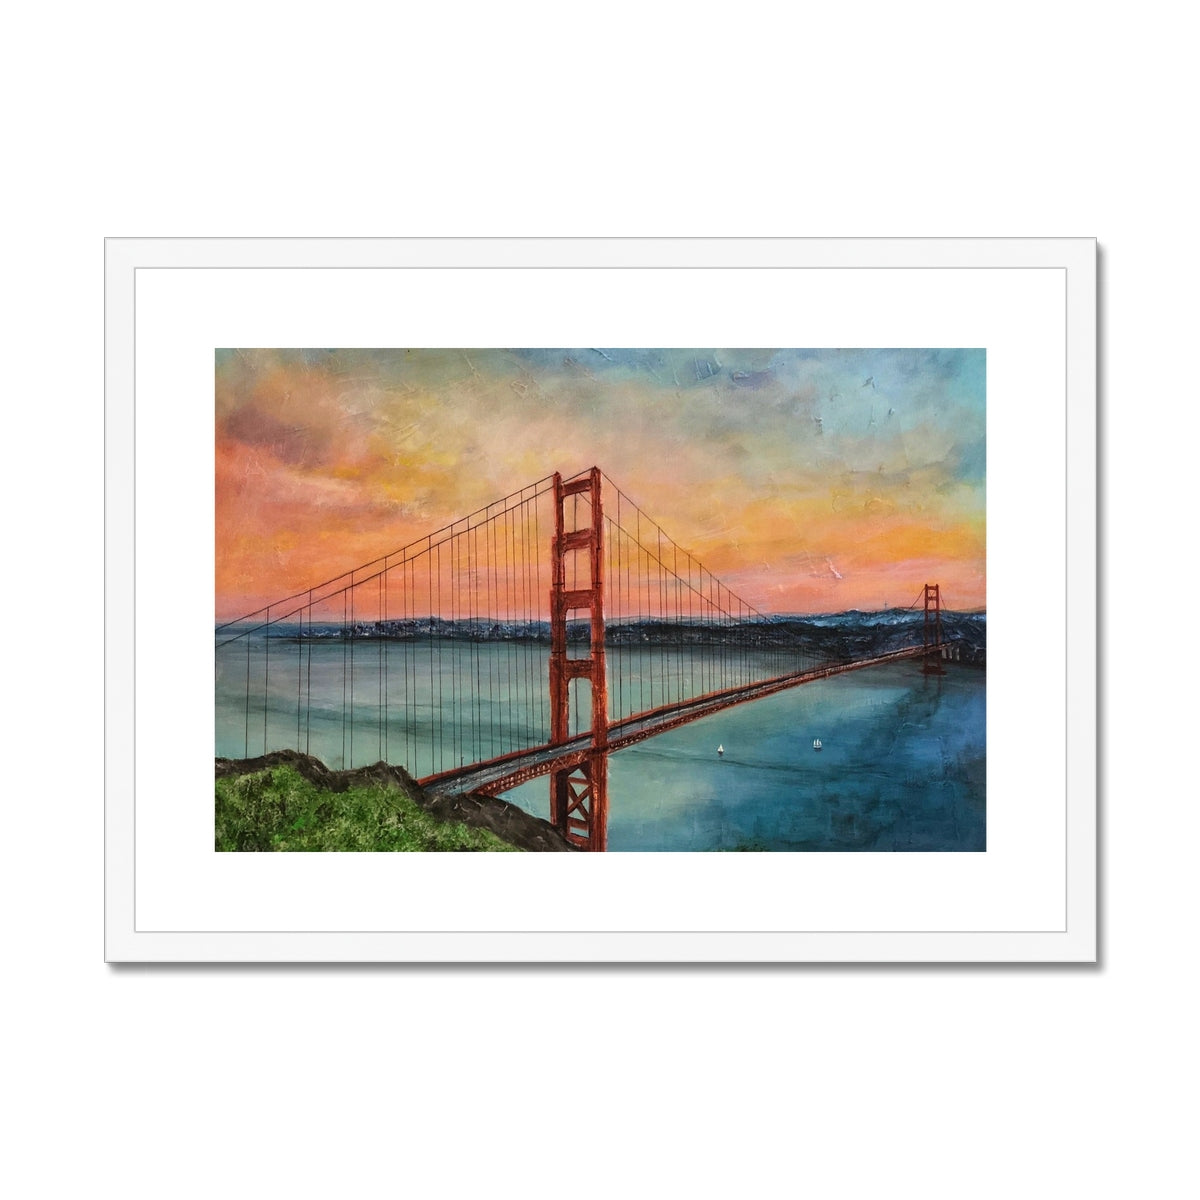 The Golden Gate Bridge Painting | Framed & Mounted Prints From Scotland-Framed & Mounted Prints-World Art Gallery-A2 Landscape-White Frame-Paintings, Prints, Homeware, Art Gifts From Scotland By Scottish Artist Kevin Hunter